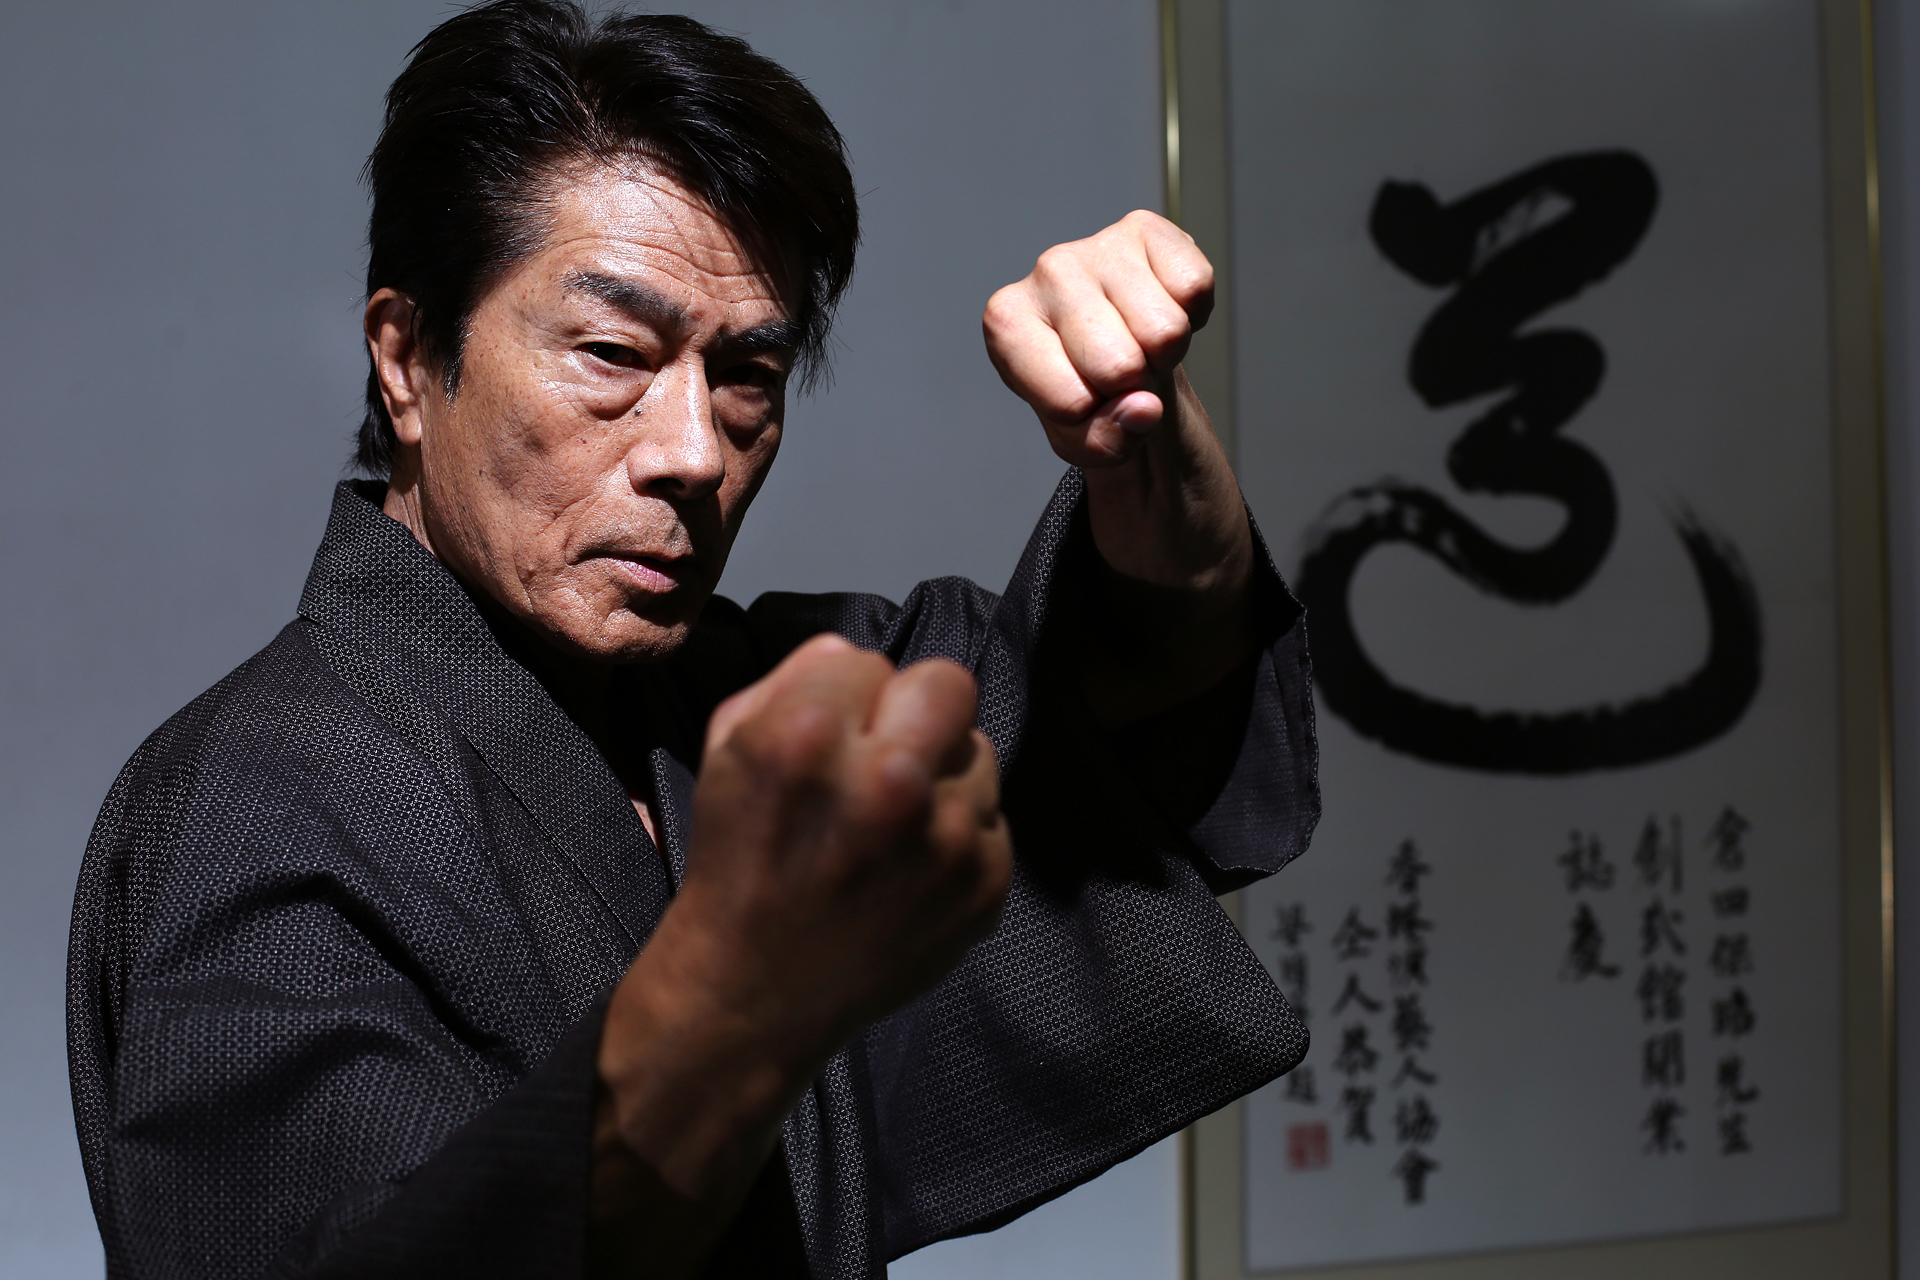 69-year-old Japanese kung fu master Yasuaki Kurata poses for picture at his karate school in Causeway Bay. Kurata is in town to hold a Kendo seminar for martial arts enthusiasts. Photo: Nora Tam